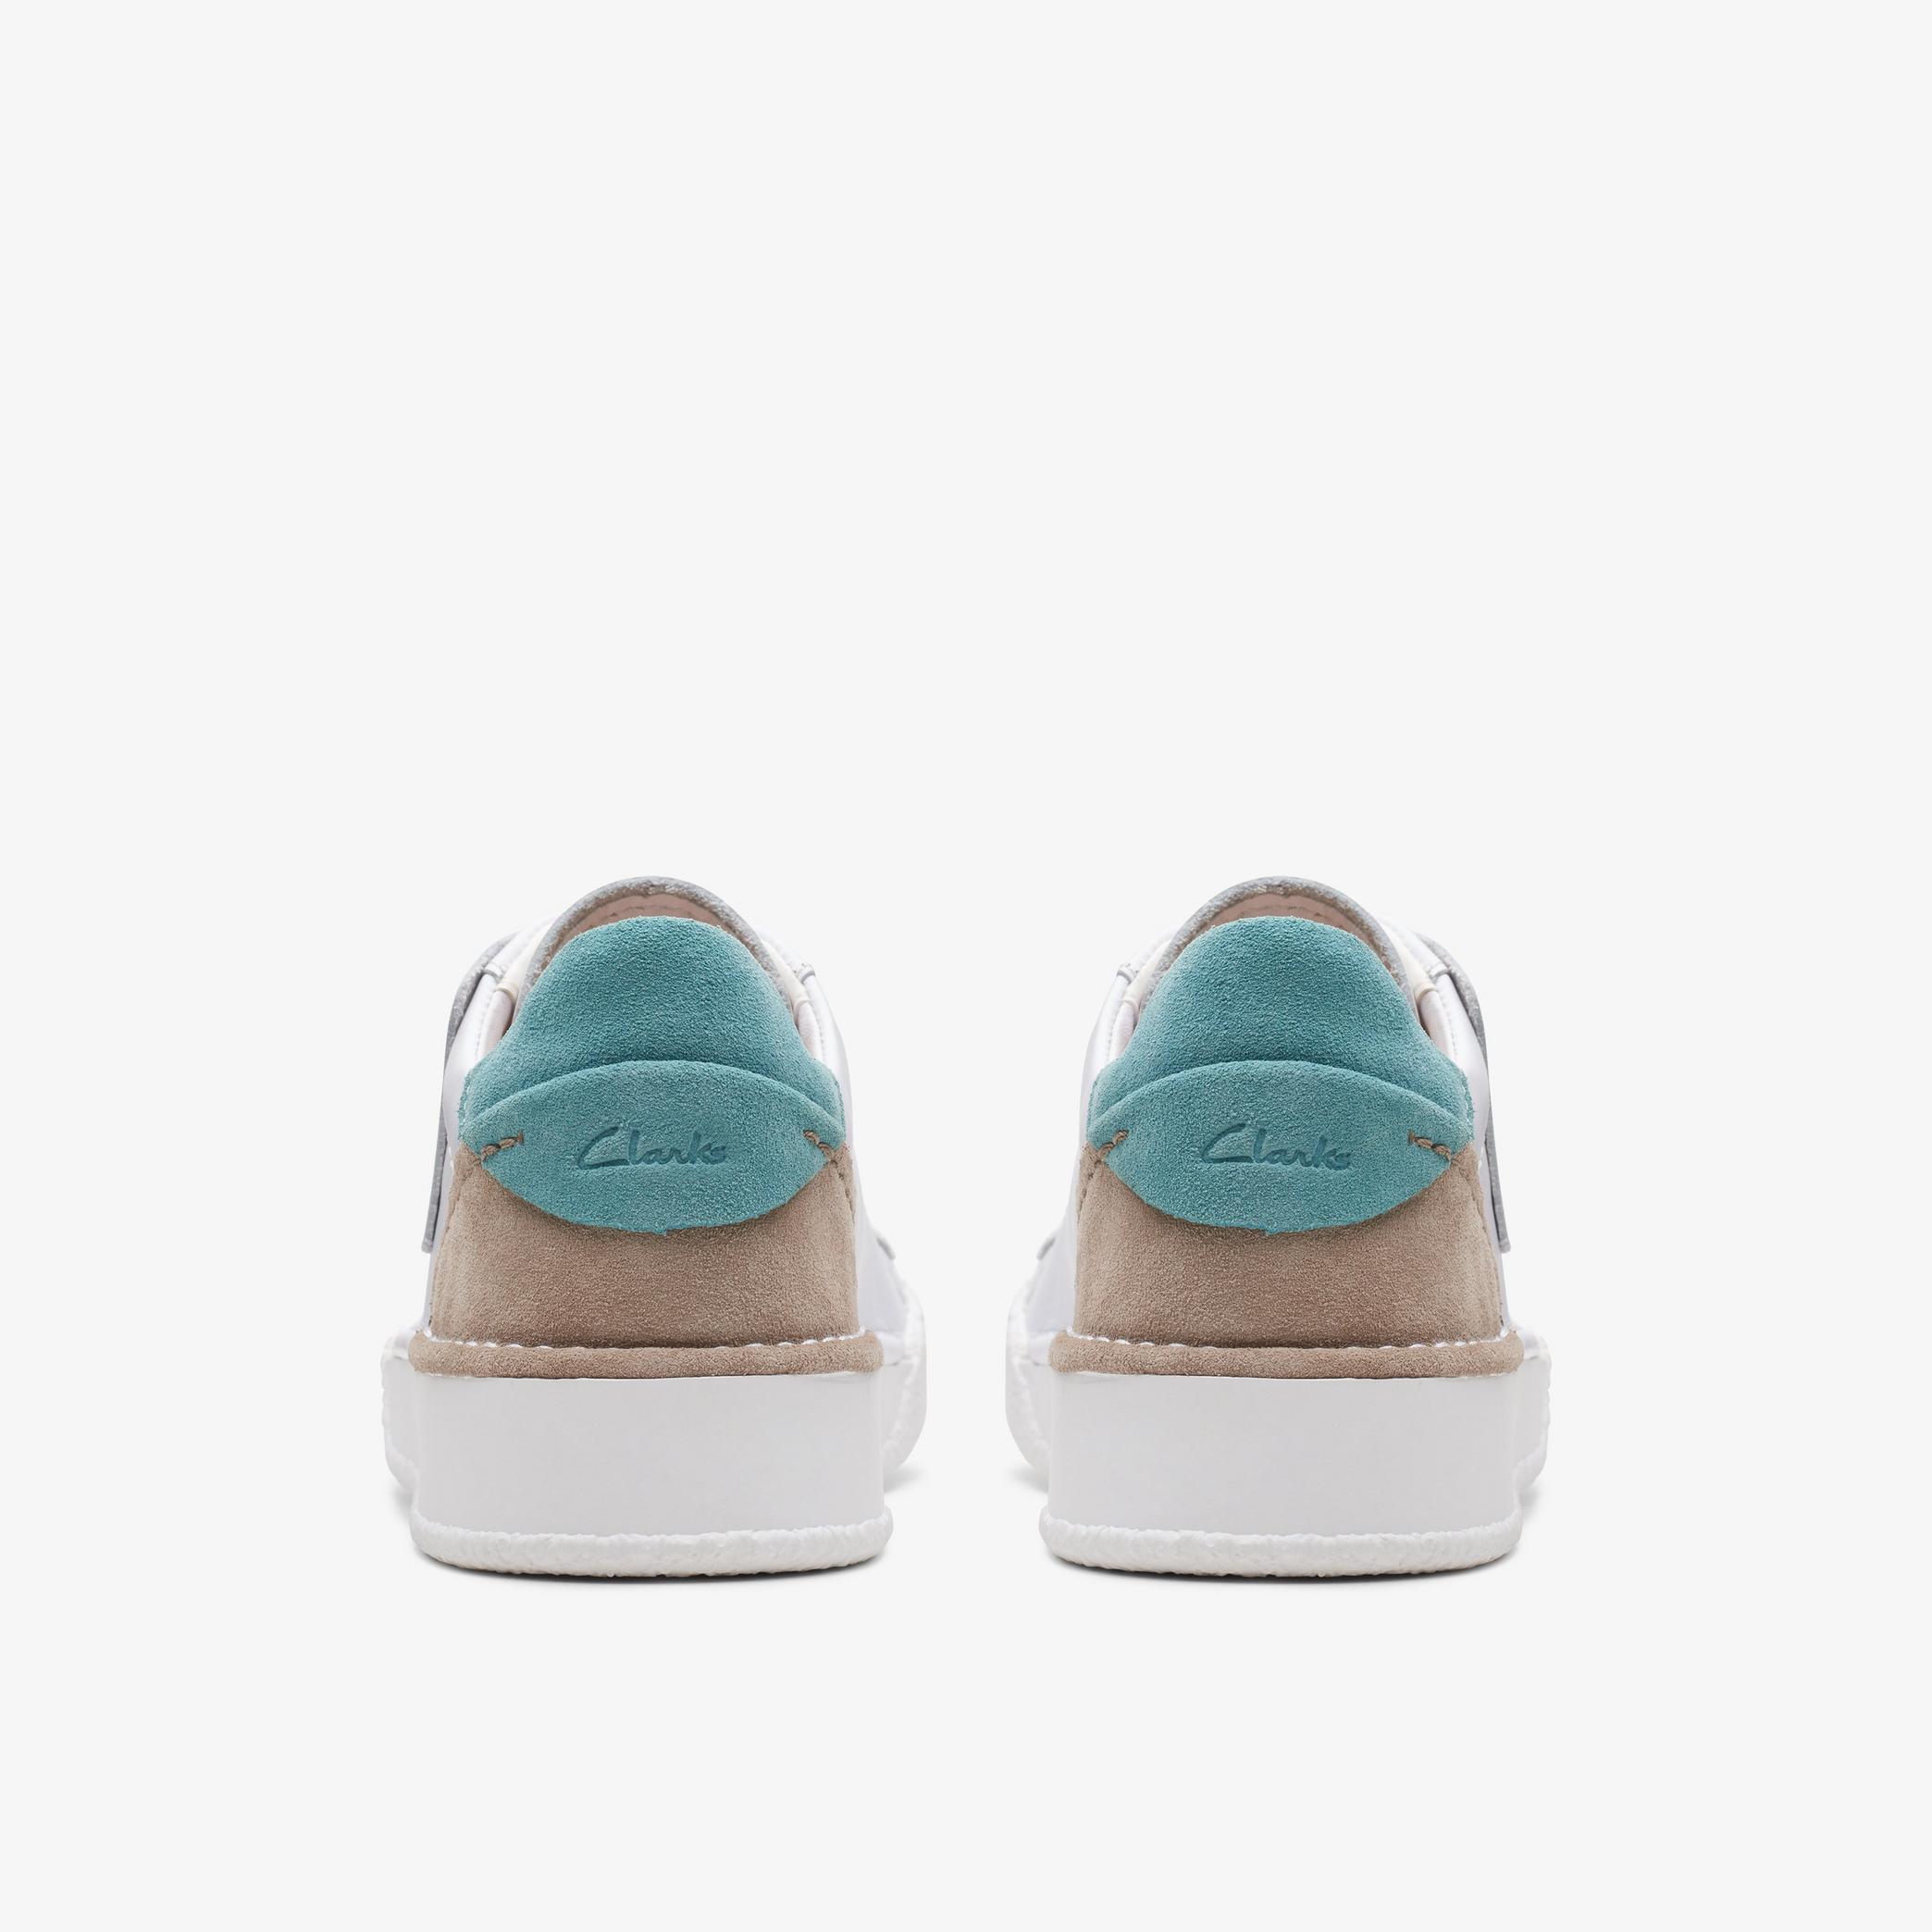 Craft Cup Lace White/Turquoise Trainers, view 5 of 6